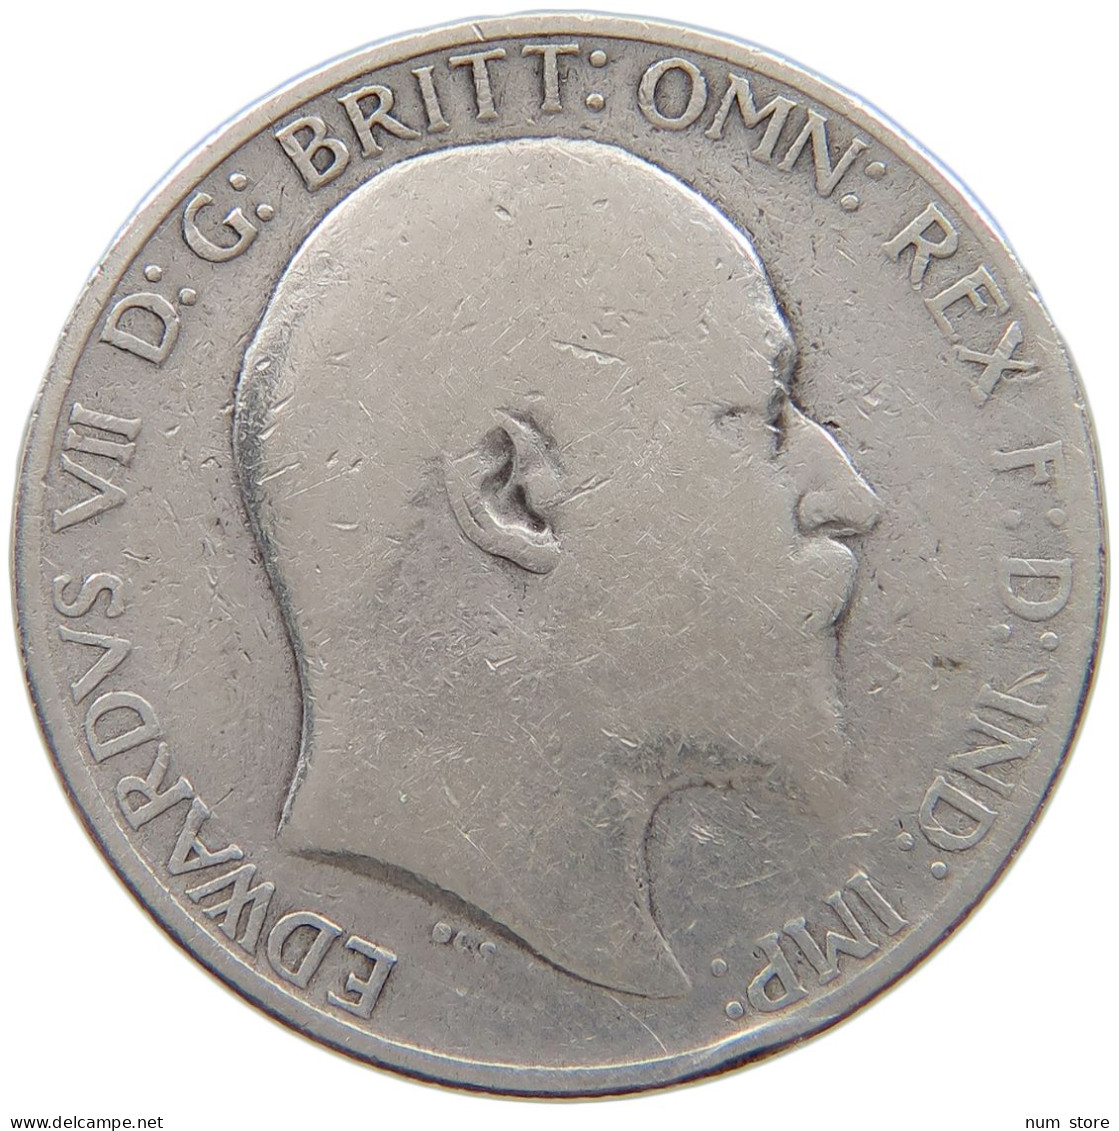 GREAT BRITAIN TWO SHILLINGS 190. Edward VII., 1901 - 1910 #a063 0733 - J. 1 Florin / 2 Schillings